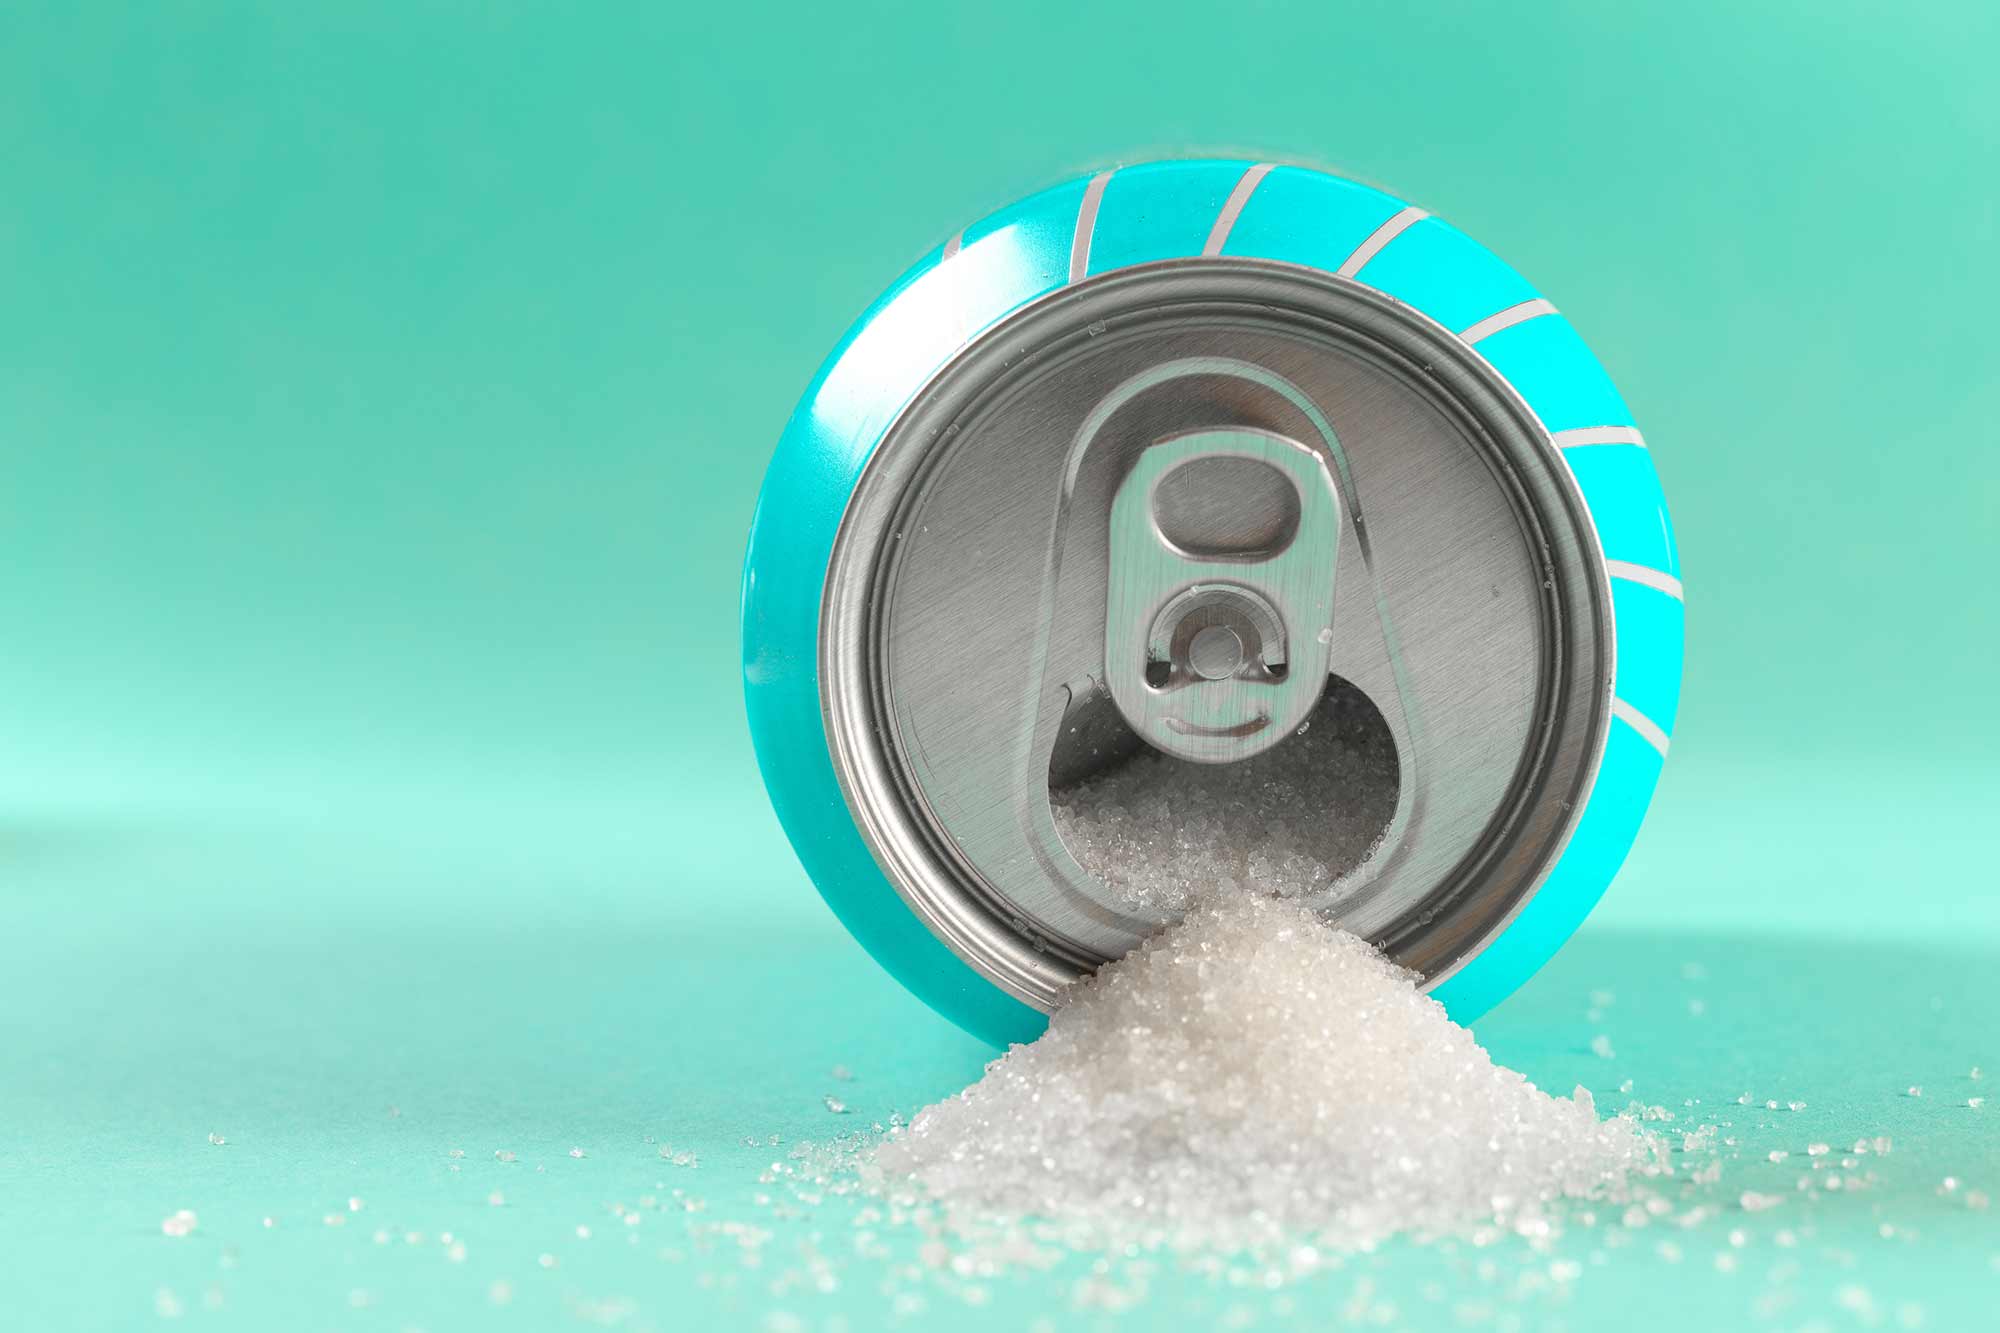 Action on Sugar said COVID-19 has led to popular companies heavily advertising and promoting their unhealthy food and drink products – but little has been done to curb it